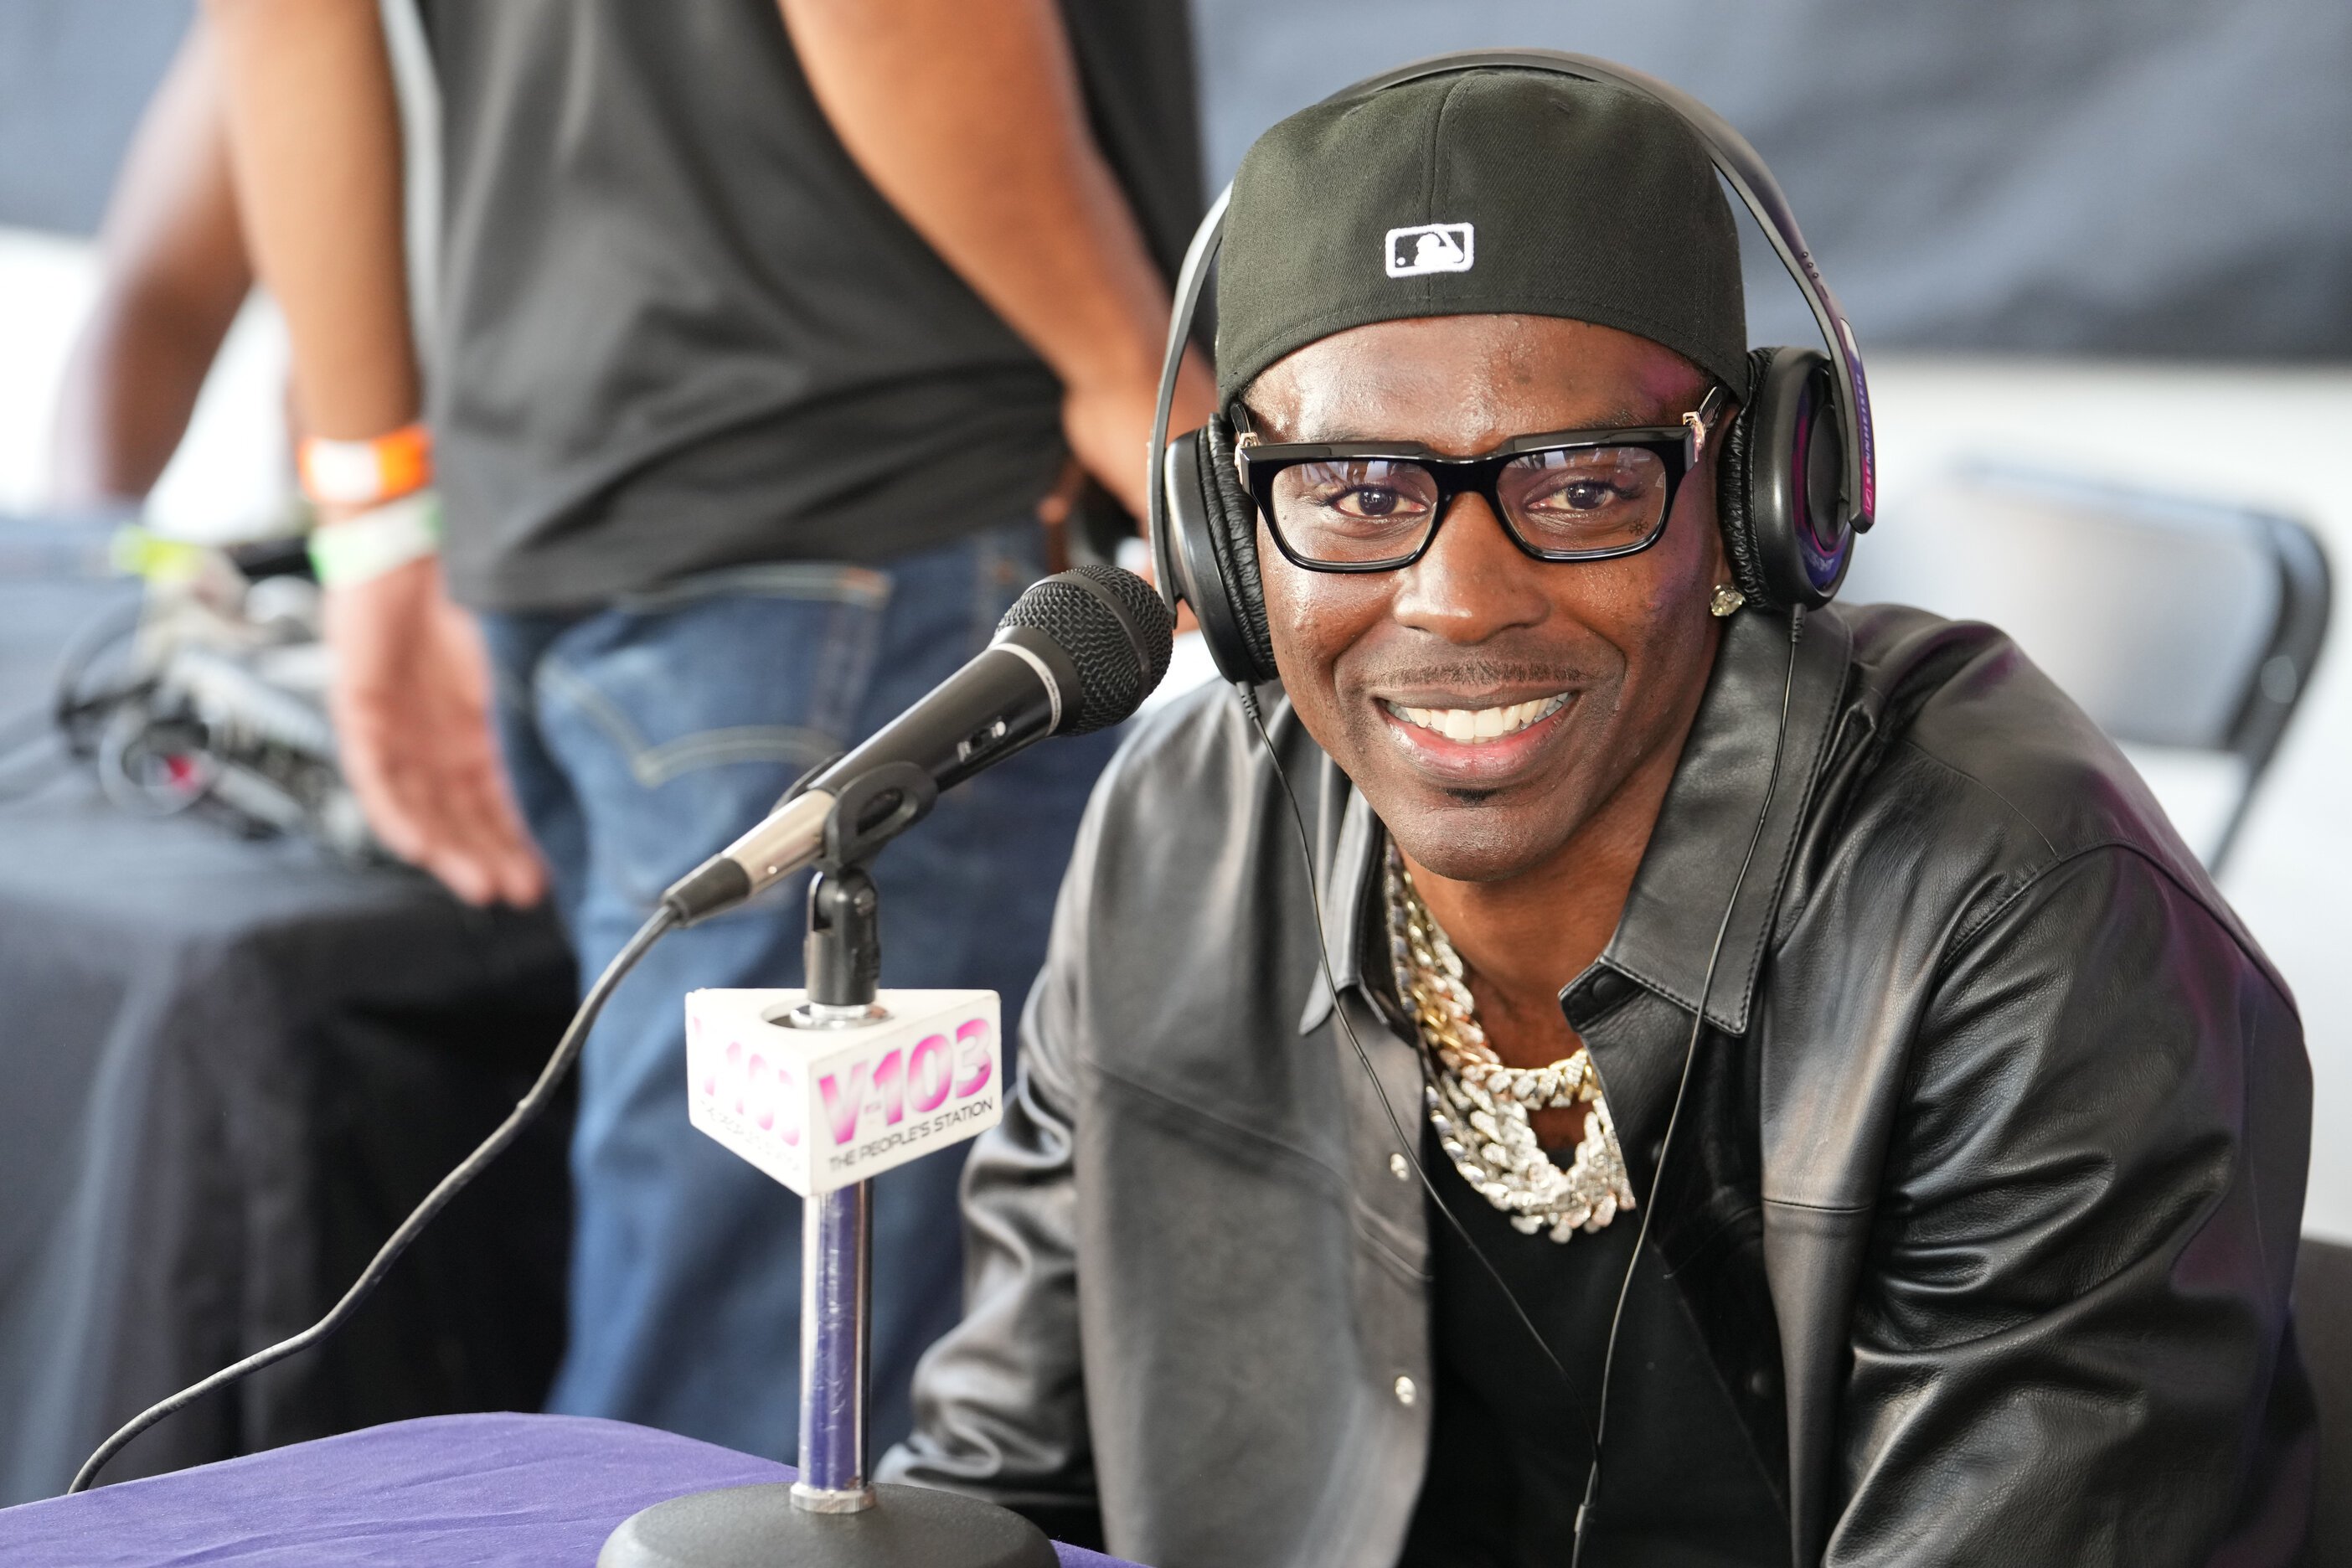 Rapper Young Dolph is seen backstage during 2021 ONE Musicfest at Centennial Olympic Park on October 09, 2021 in Atlanta, Georgia.